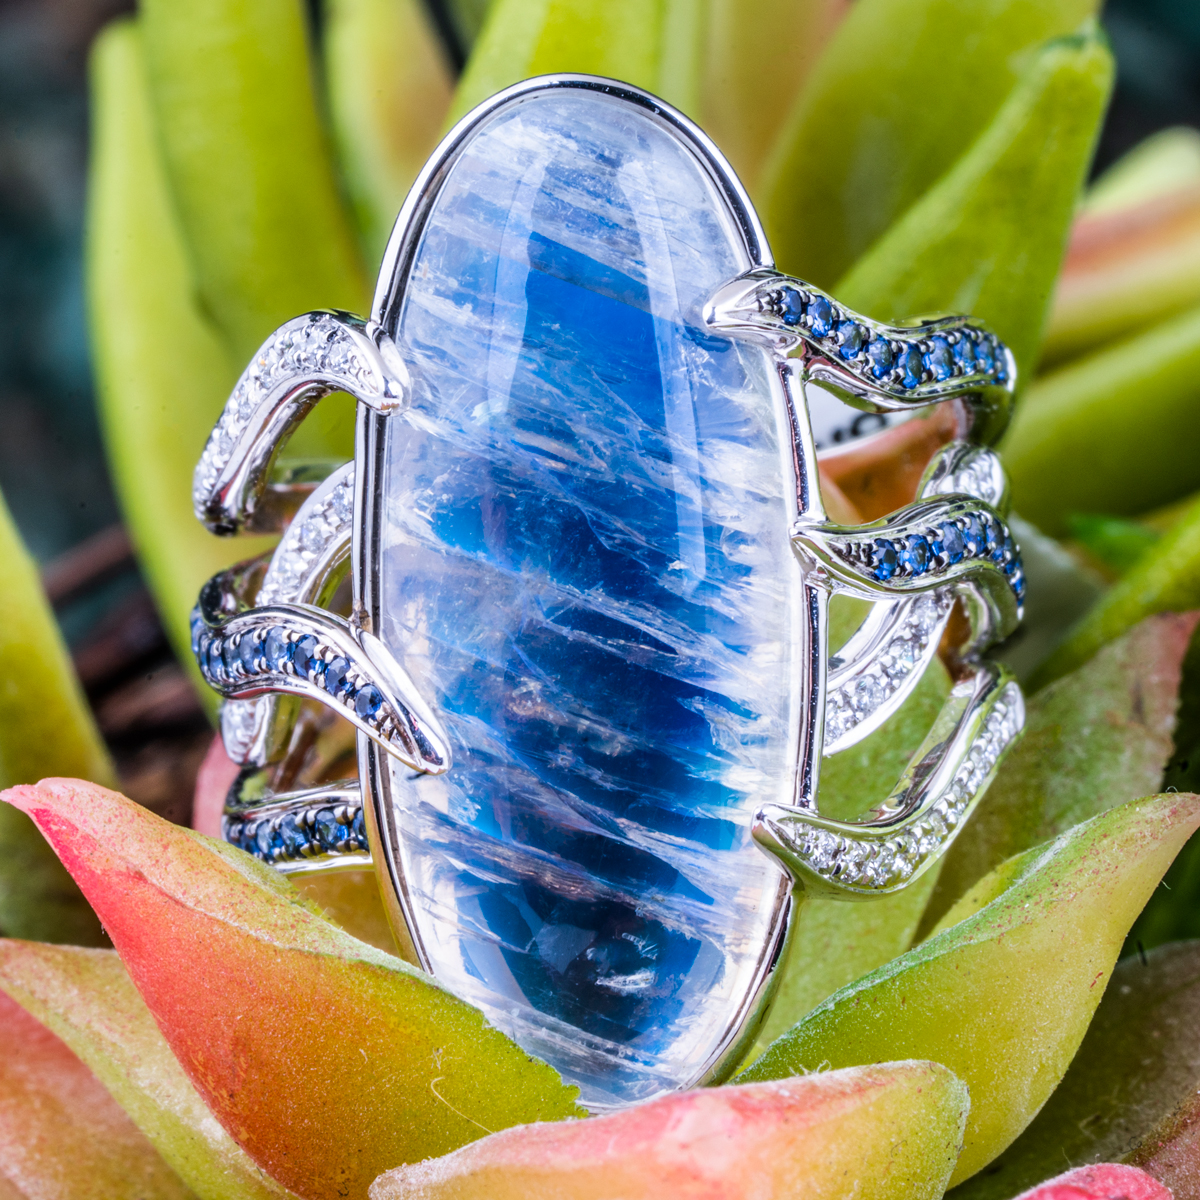 White gold four-row open ring set with diamonds, blue sapphires, and centered with moonstone.